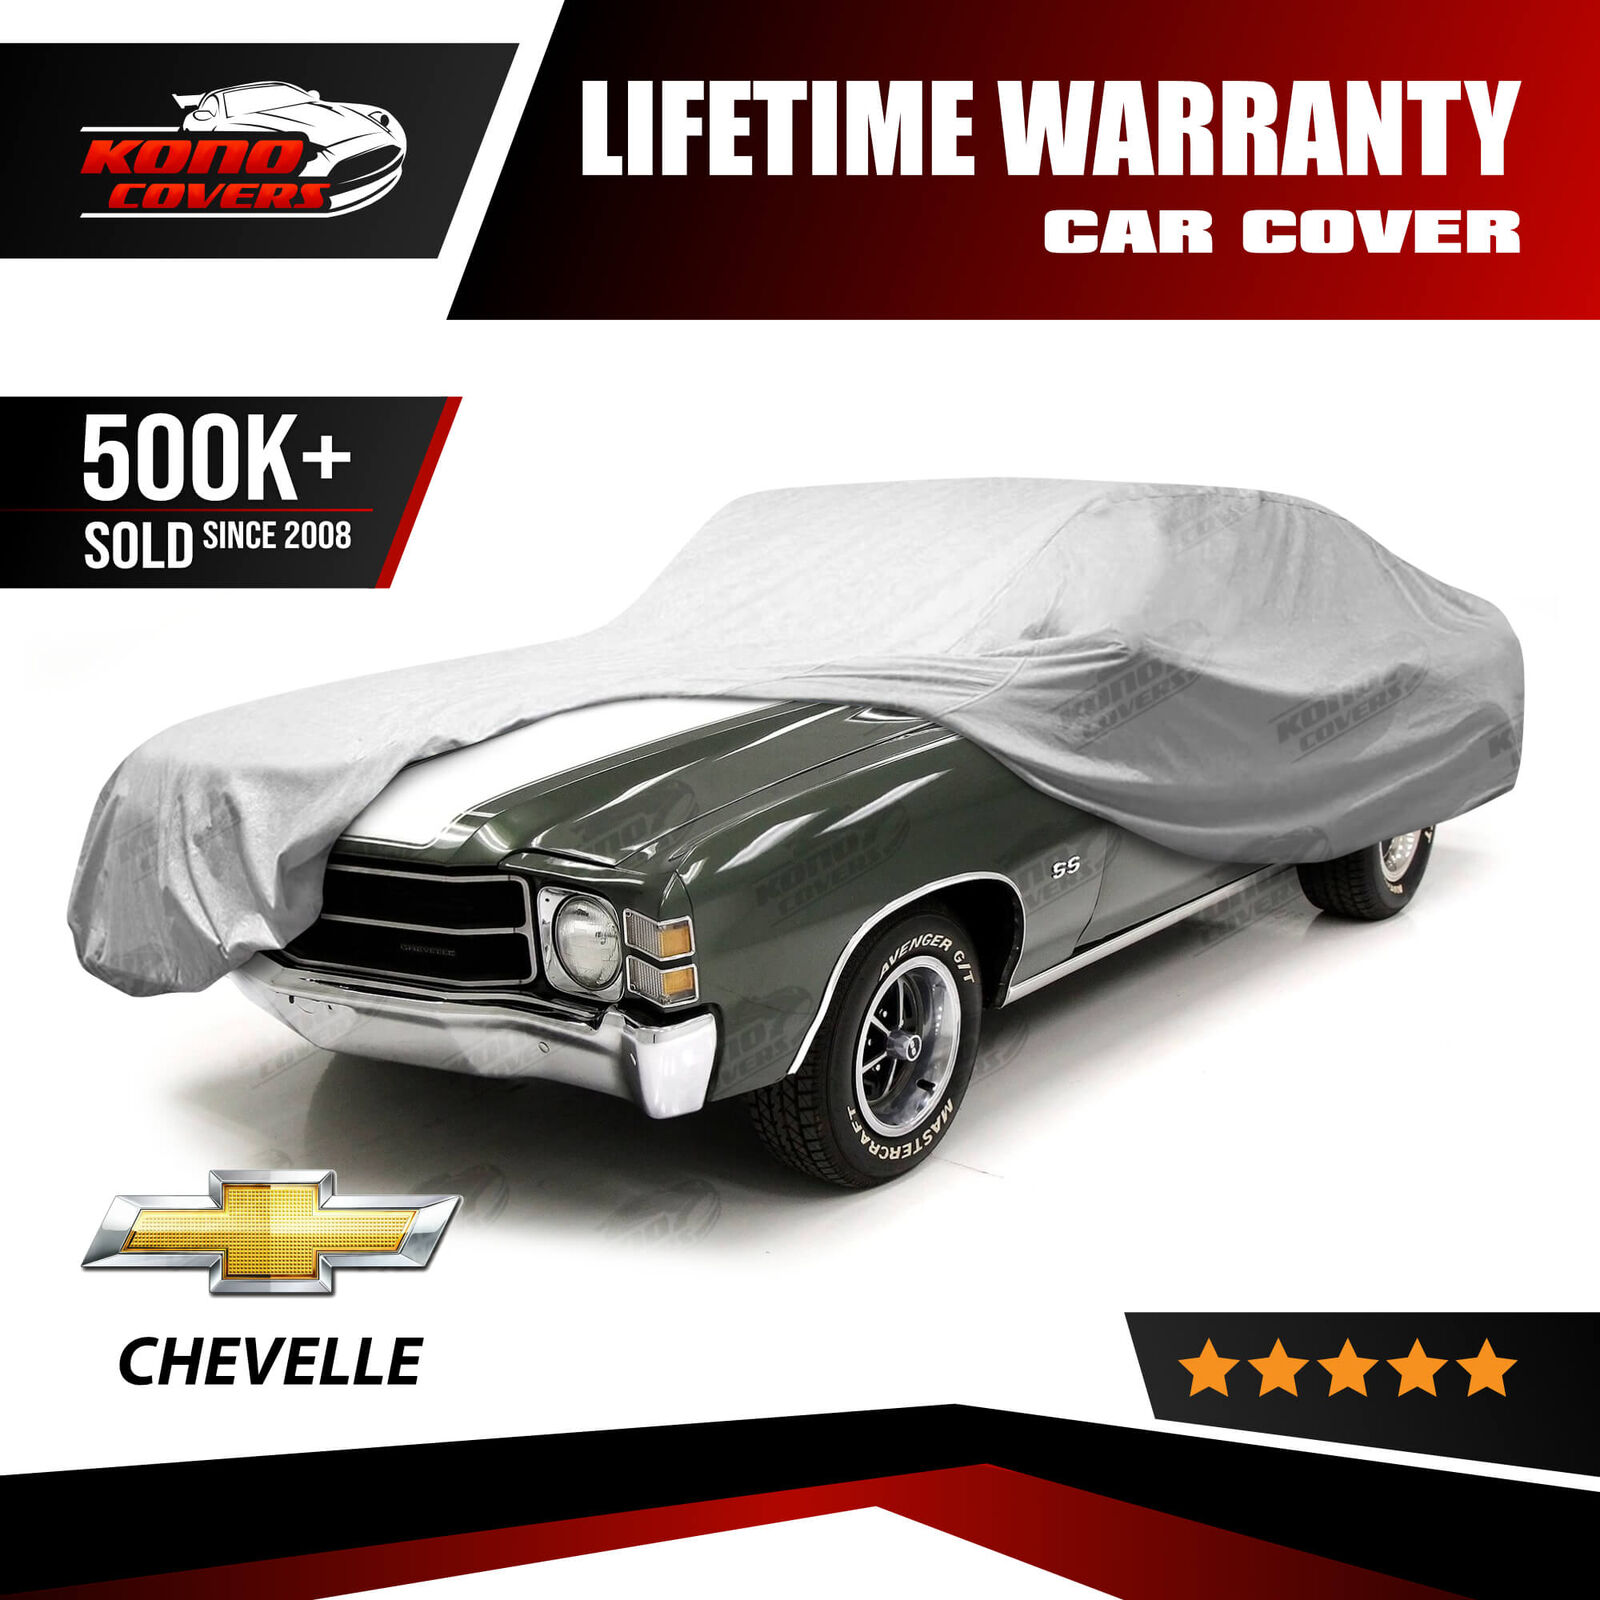 Chevrolet Chevelle 4 Layer Car Cover 1964 1965 1966 1967 1968 1969 1970 1971